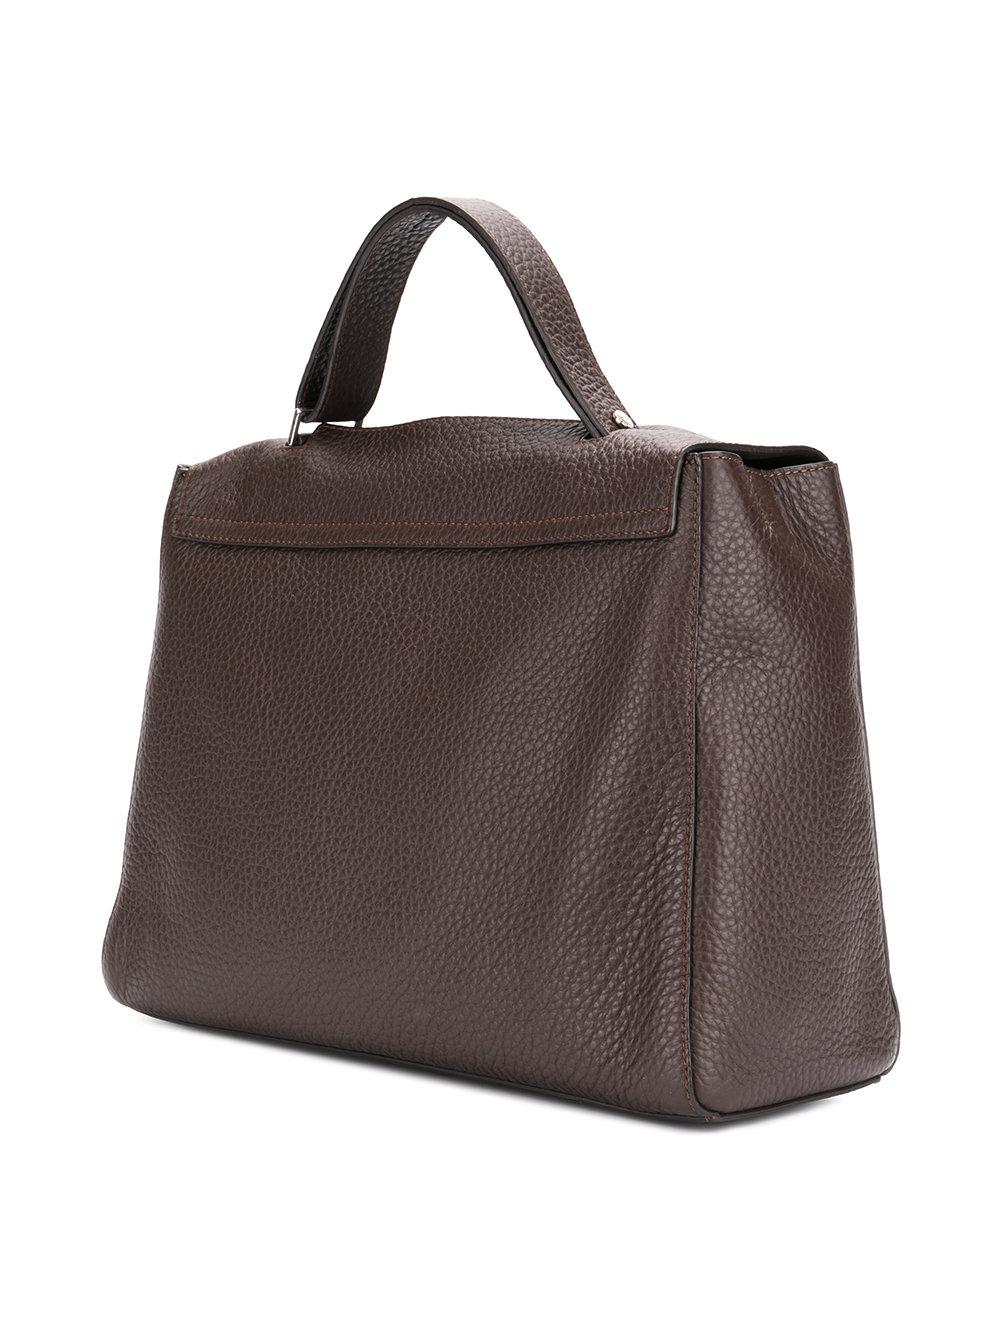 Lyst - Orciani Textured Tote Bag in Brown